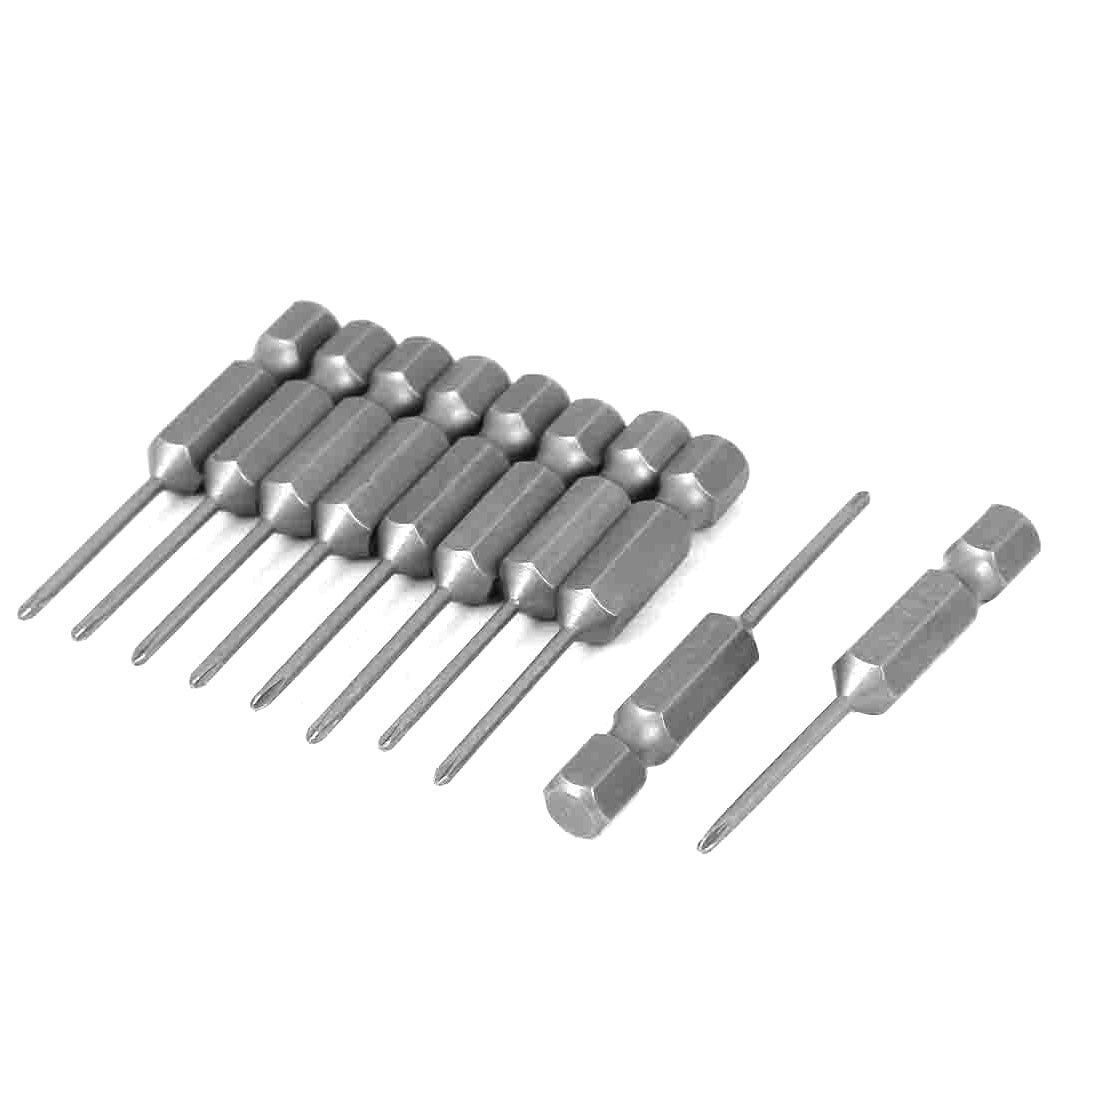 uxcell Uxcell 1/4" Hex 1.5mm Phillips PH00 Magnetic Screwdriver Power Screw Insert Bits 50mm Long 10pcs